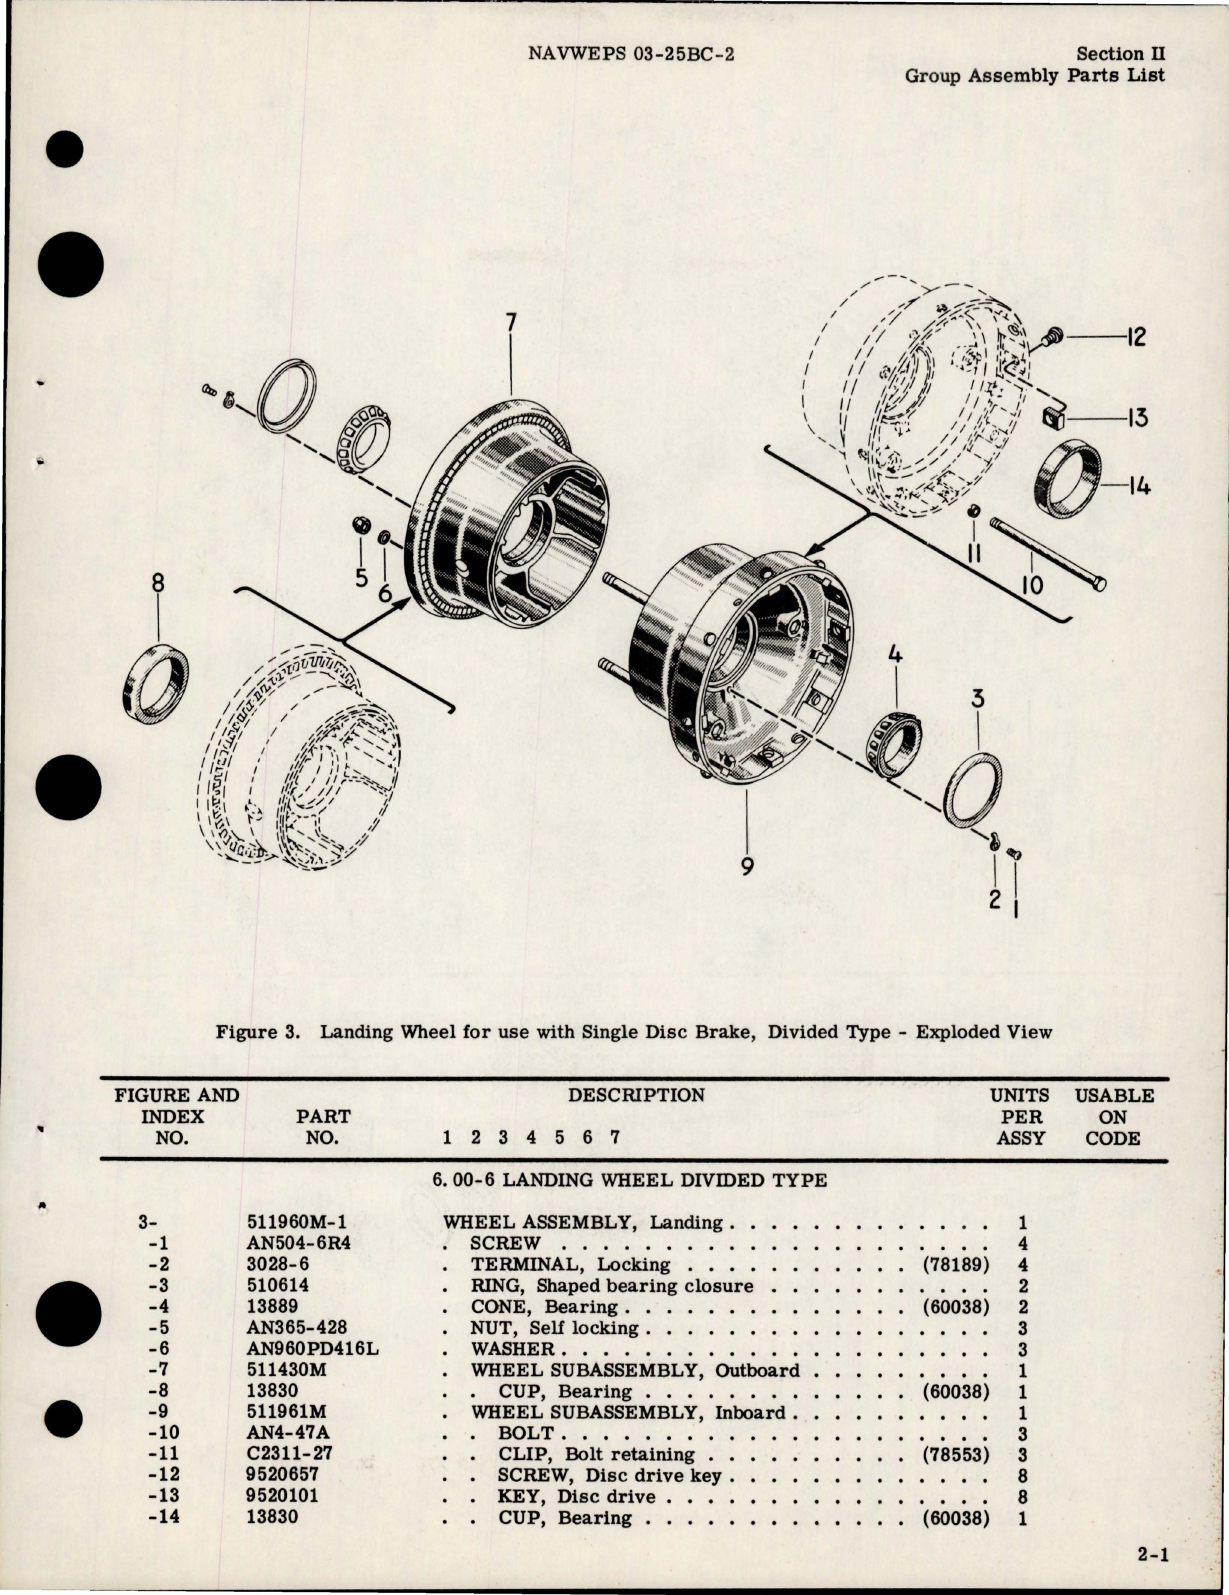 Sample page 9 from AirCorps Library document: Illustrated Parts Breakdown for Landing Wheels for use with Disc Brakes 